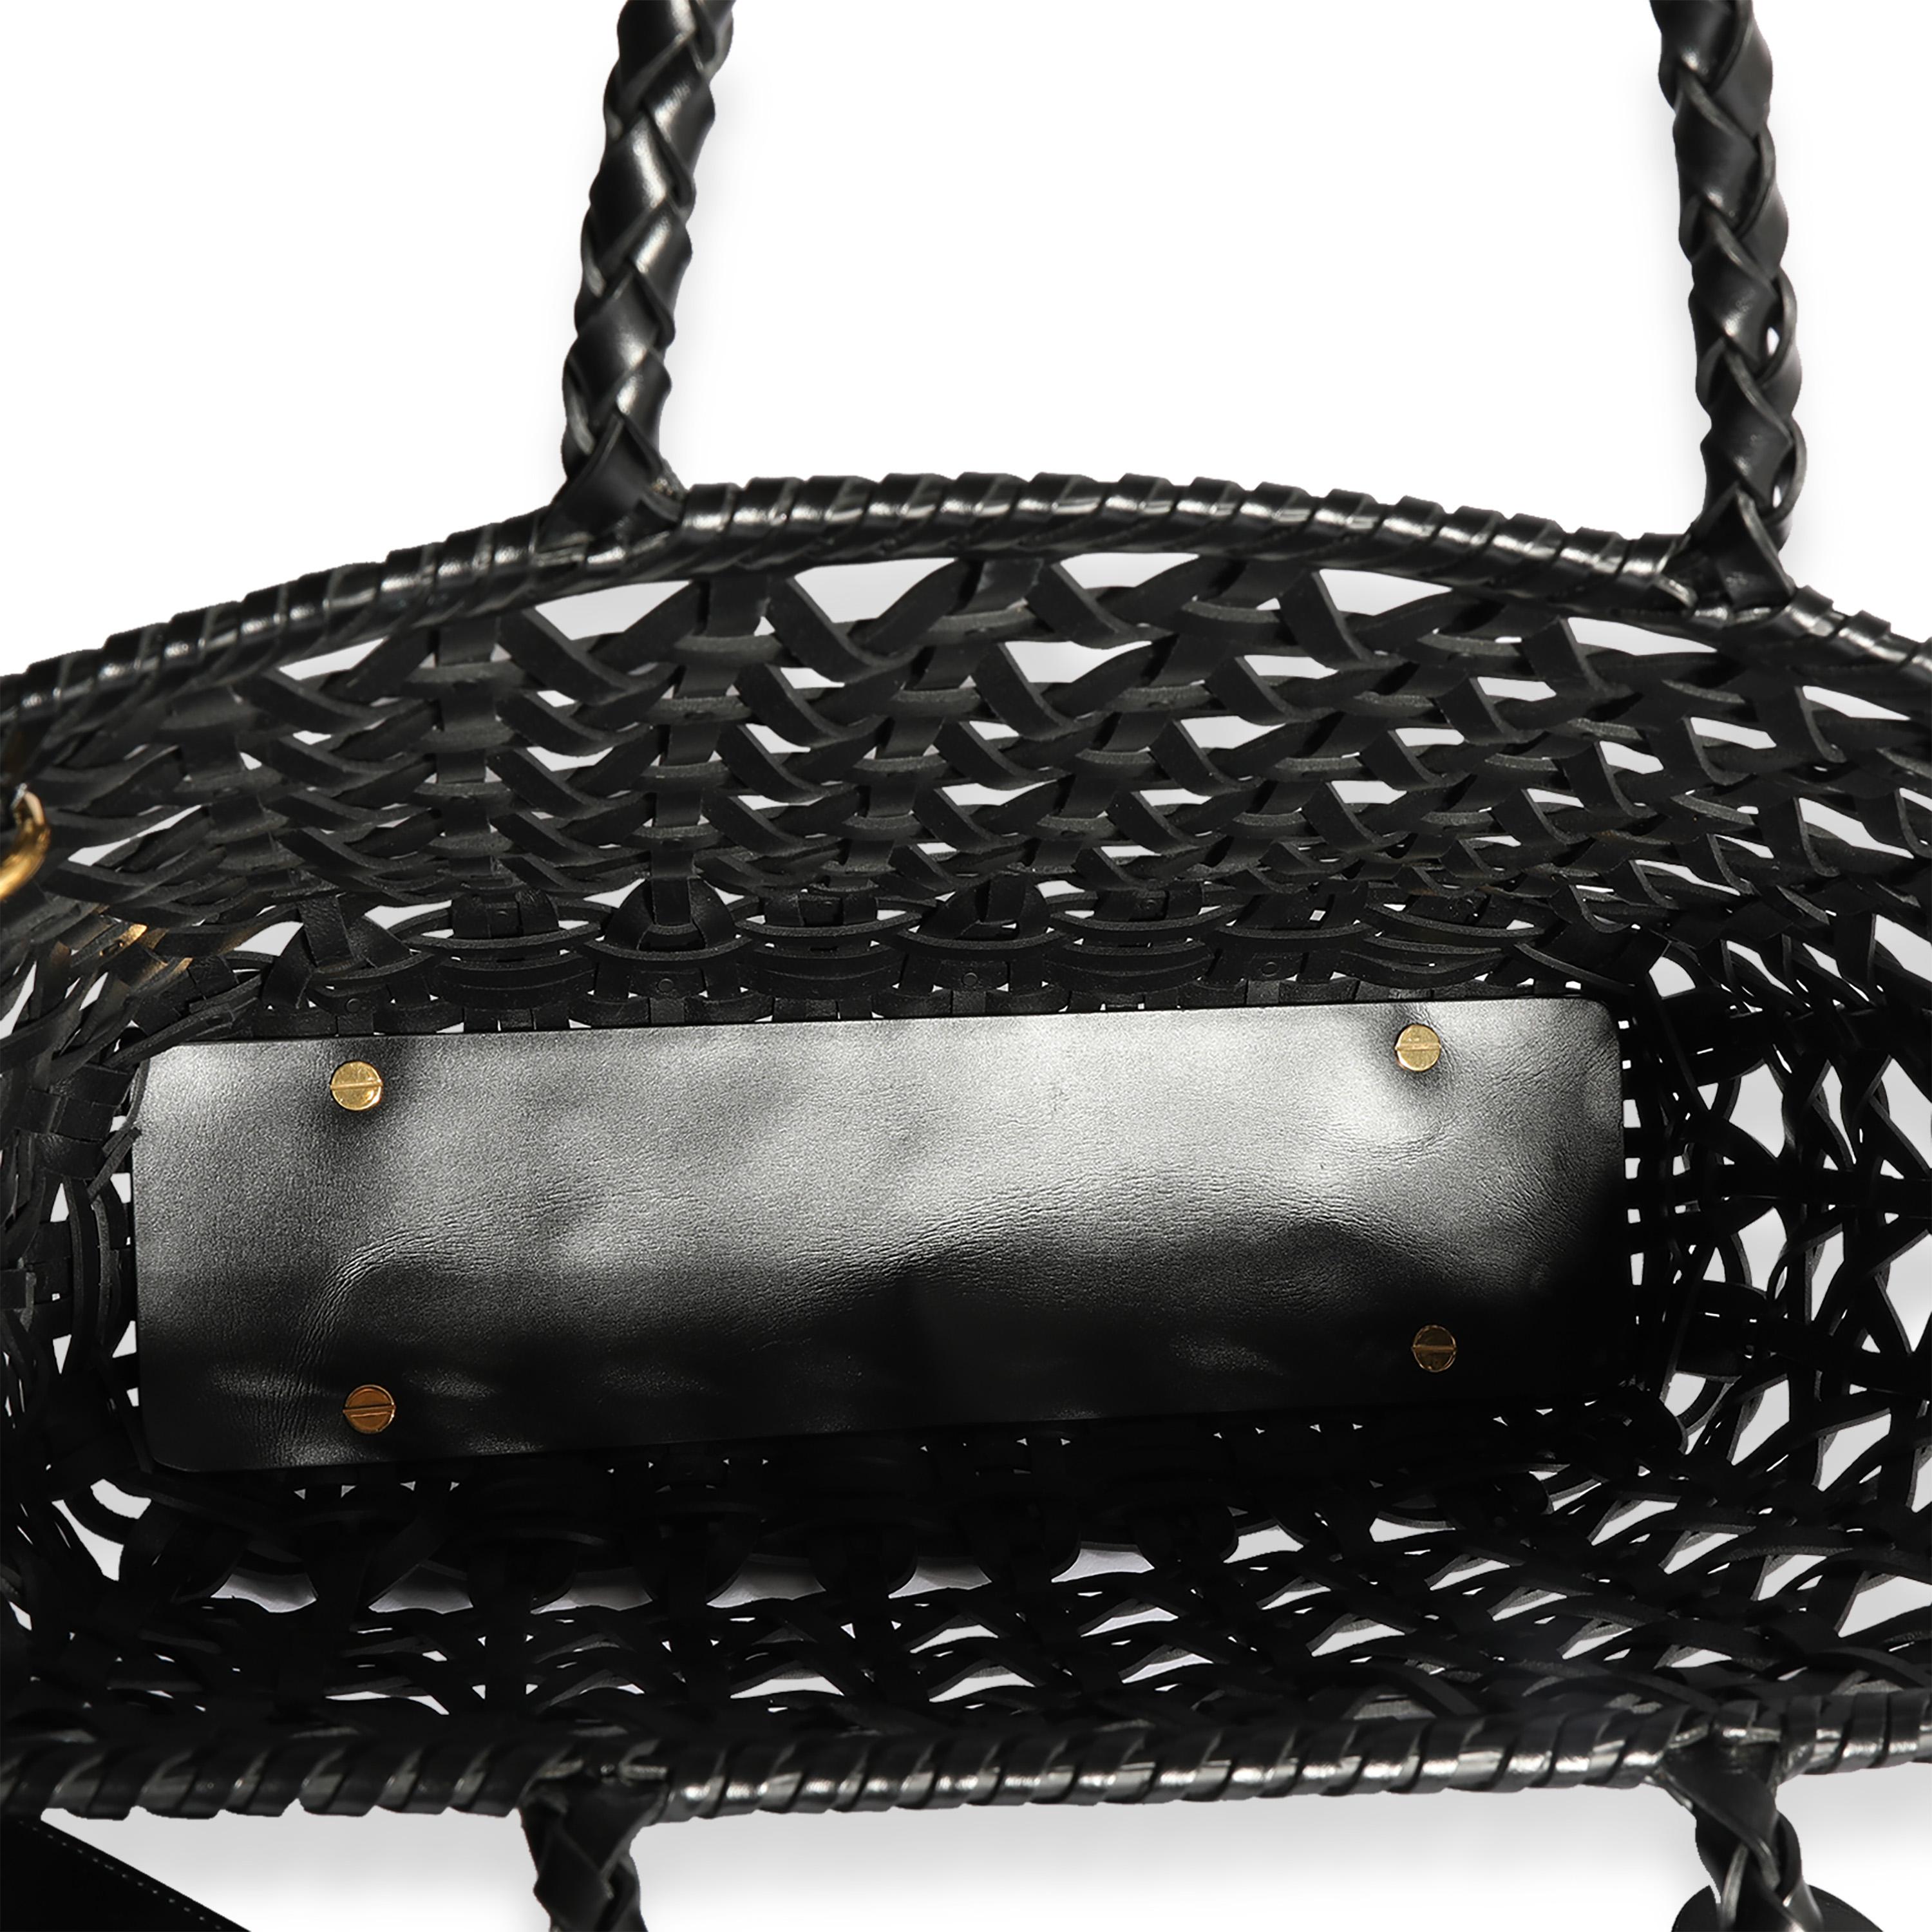 Listing Title: Dior Black Woven Leather Large Lady Dior Bag
SKU: 124350
Condition: Pre-owned 
Handbag Condition: Very Good
Condition Comments: Very Good Condition. Light scuffing at exterior and light fraying. Scuffing and wrinkling at